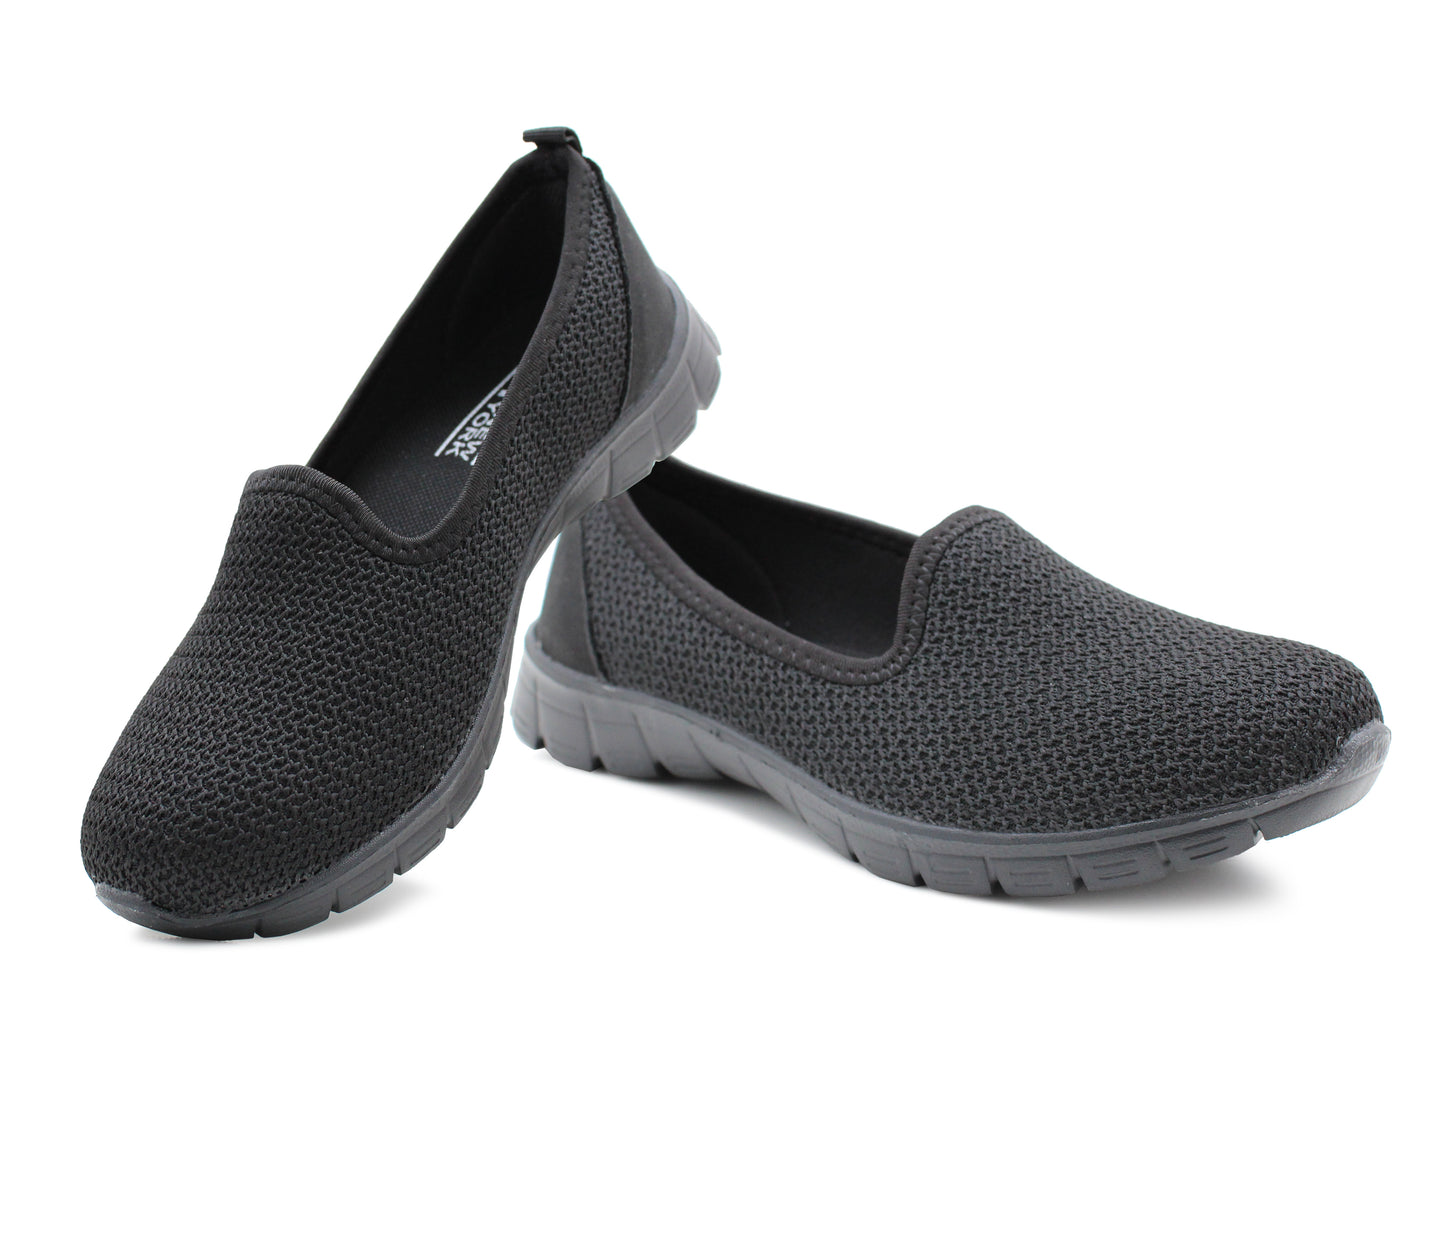 B386880 Womens Lightweight Slip On Breathable Mesh Trainer Pumps in Black